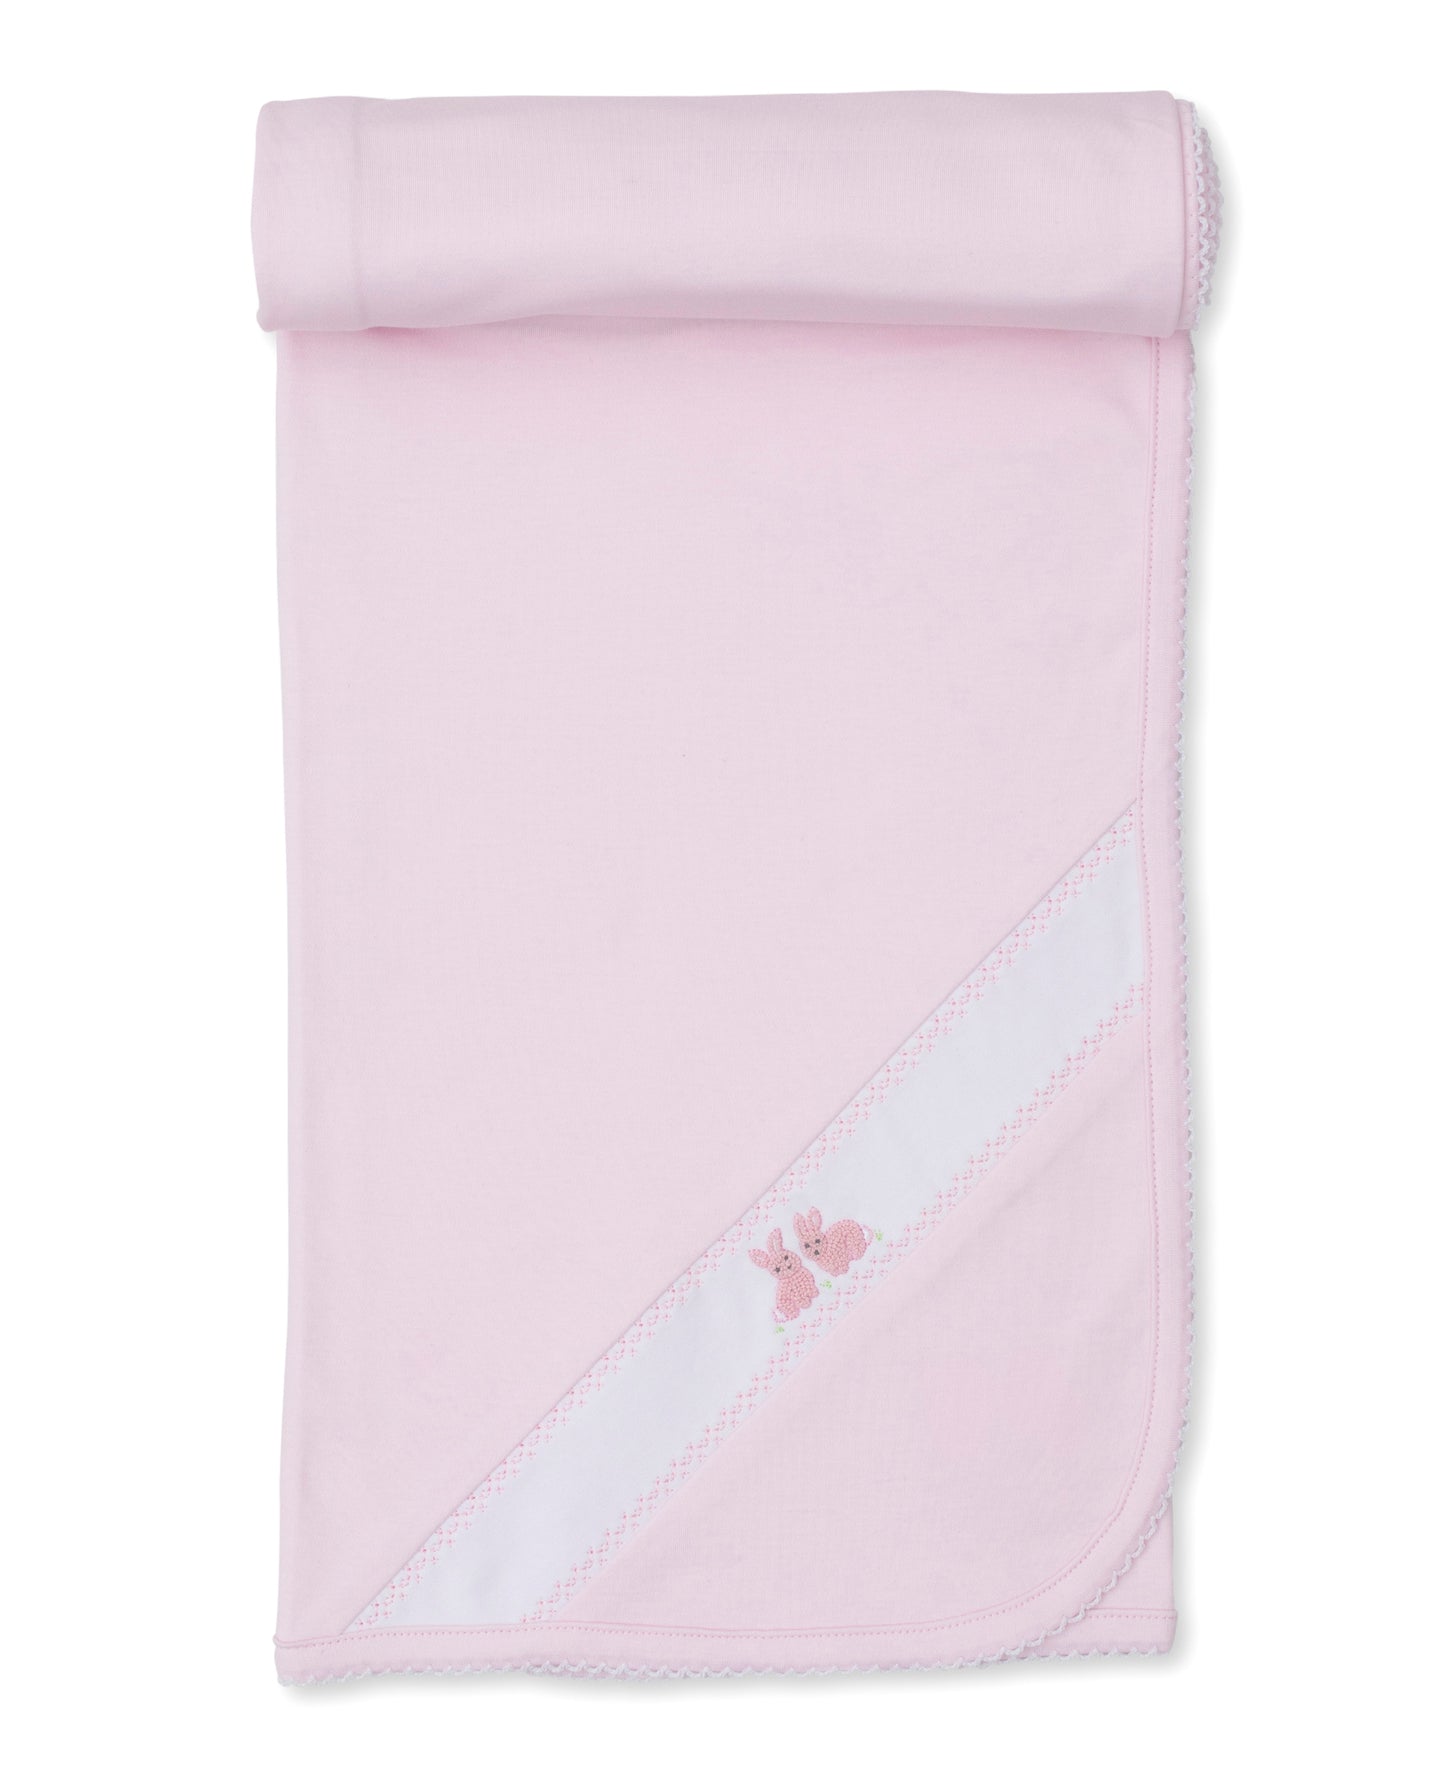 Premier Cottontail Hollows Pink Hand Emb. Blanket